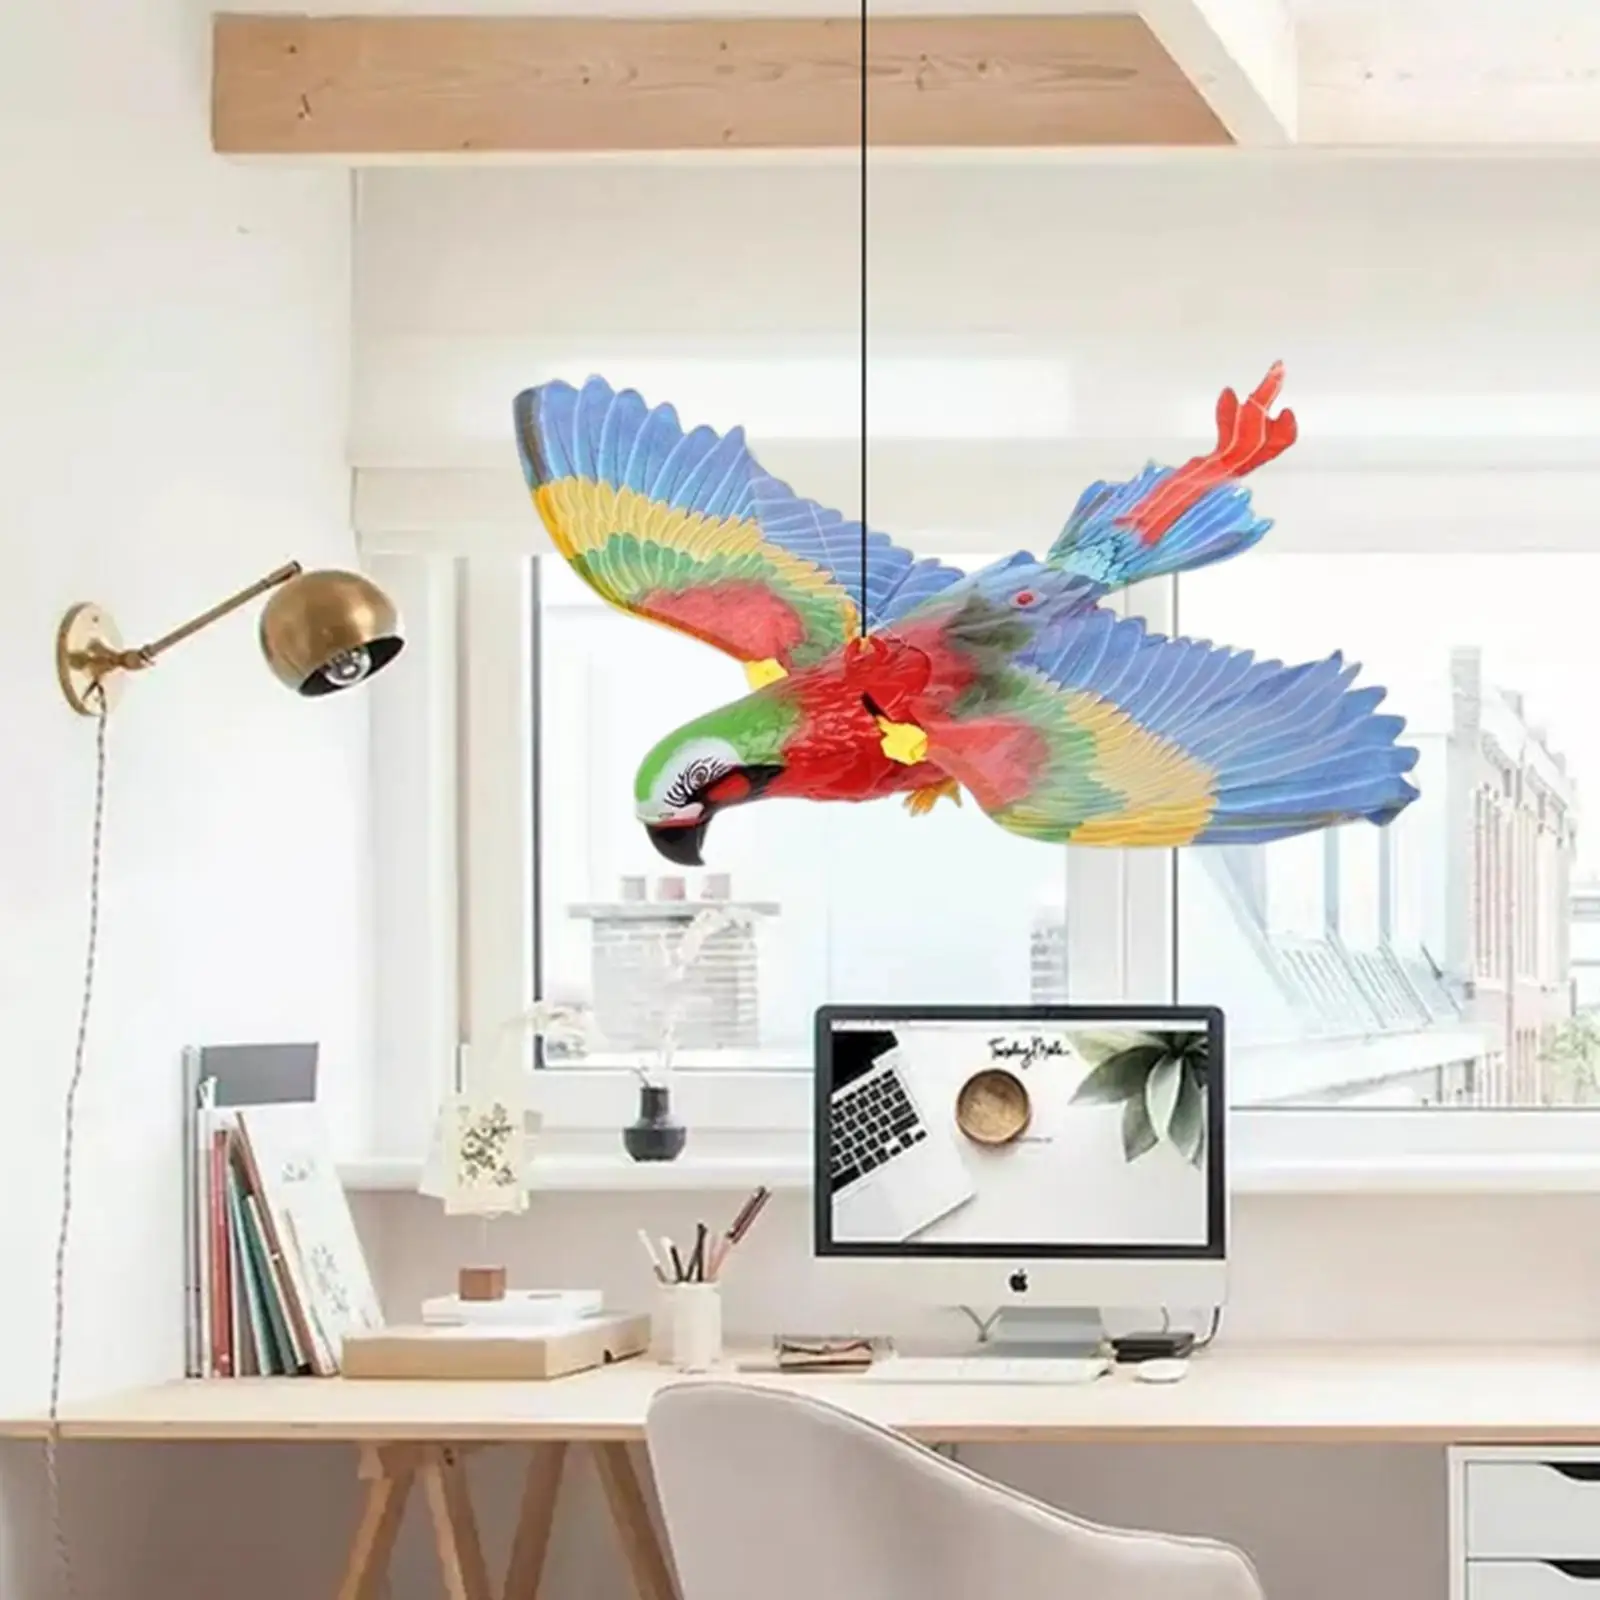 Electric Flying Bird Toy with Hanging Wire for Ceiling Indoor Lifelike